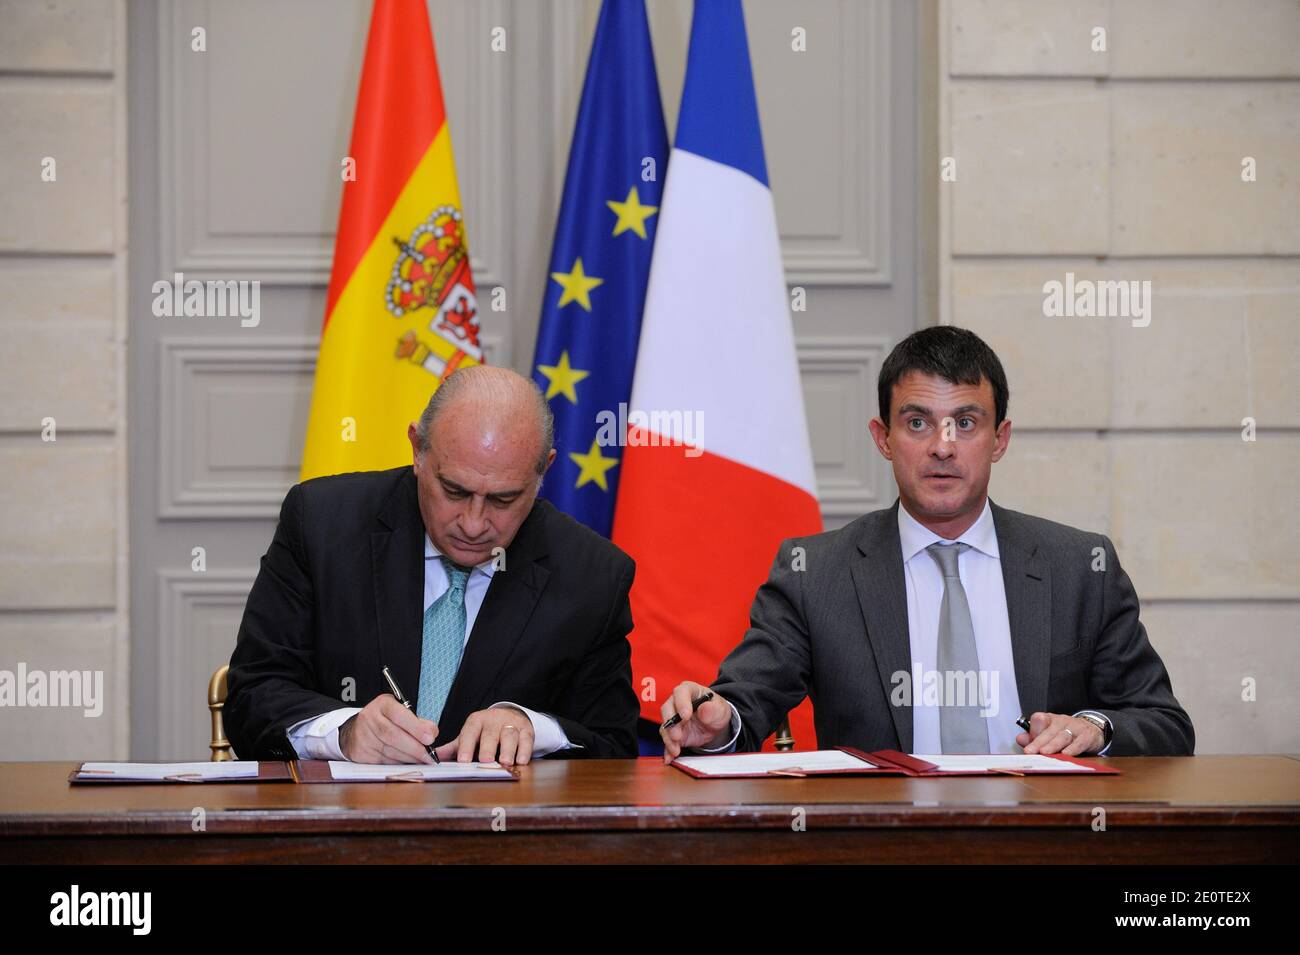 Spanish Interior Minister Jorge Fernandez and French Interior Minister Manuel Valls attend a signing ceremony at Elysee Palace in Paris, France on October 10, 2012 as part of French-Spanish Summit. Photo by Jacques Witt/Pool/ABACAPRESS.COM Stock Photo